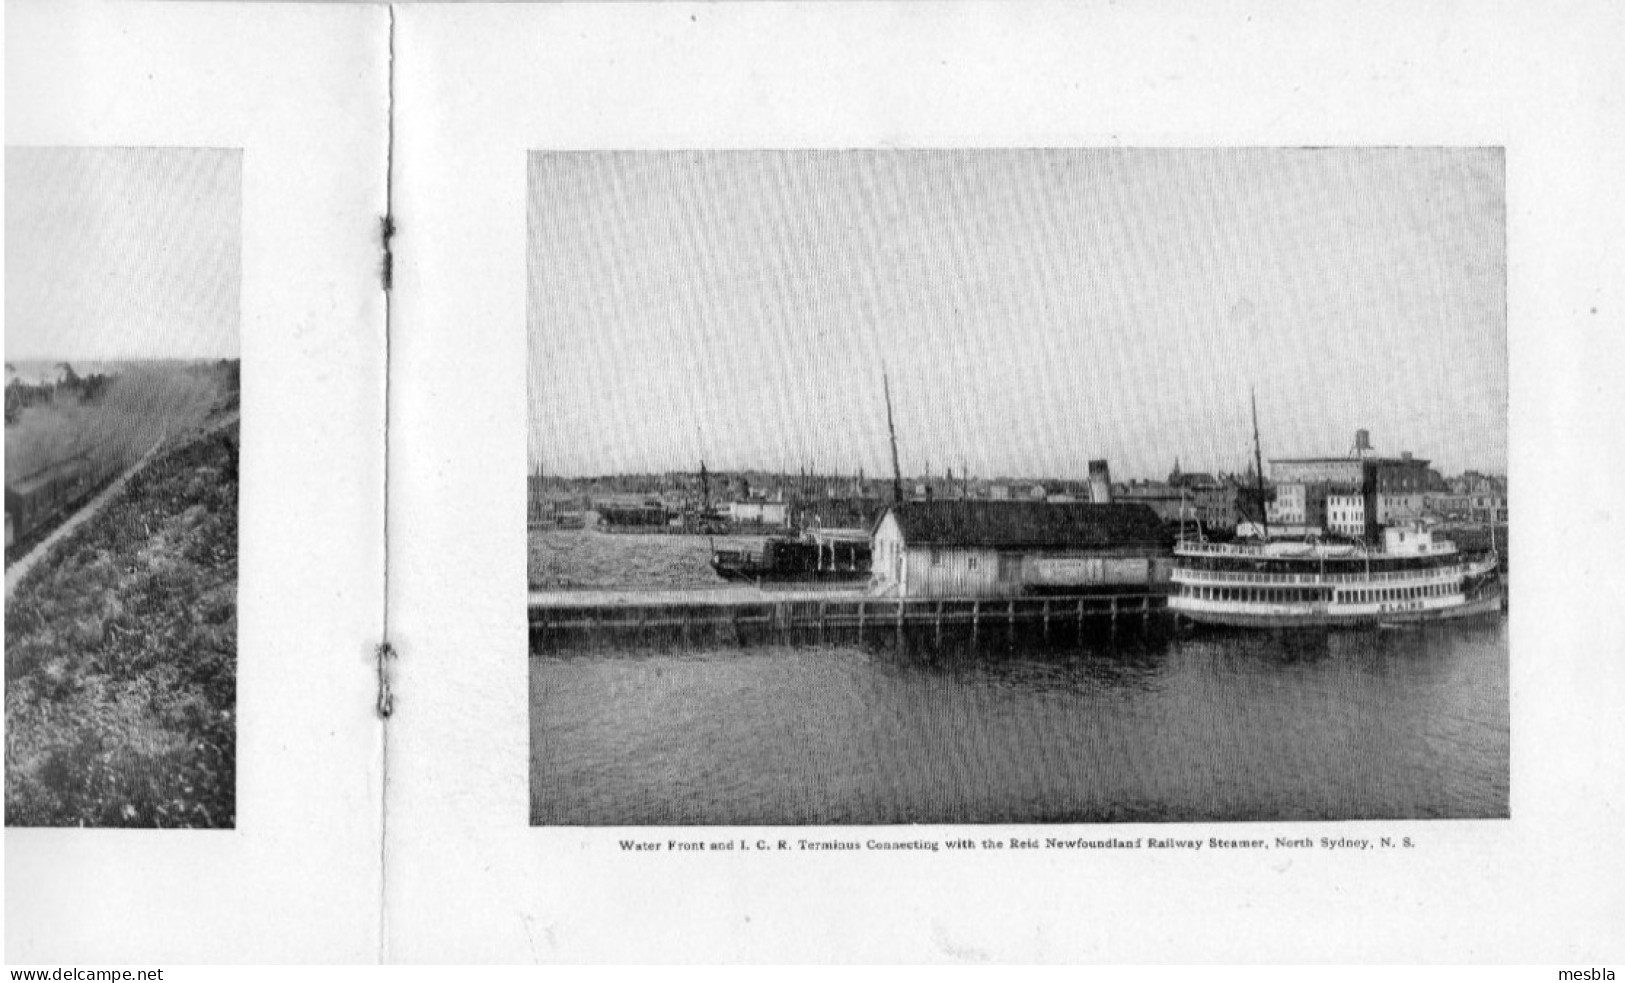 Fascicule De 20 Pages Recto - Verso  - SYDNEY -  Beautiful  CAPE  BRETON - The Place To Spend A Summer Holiday - 1908 - Culture